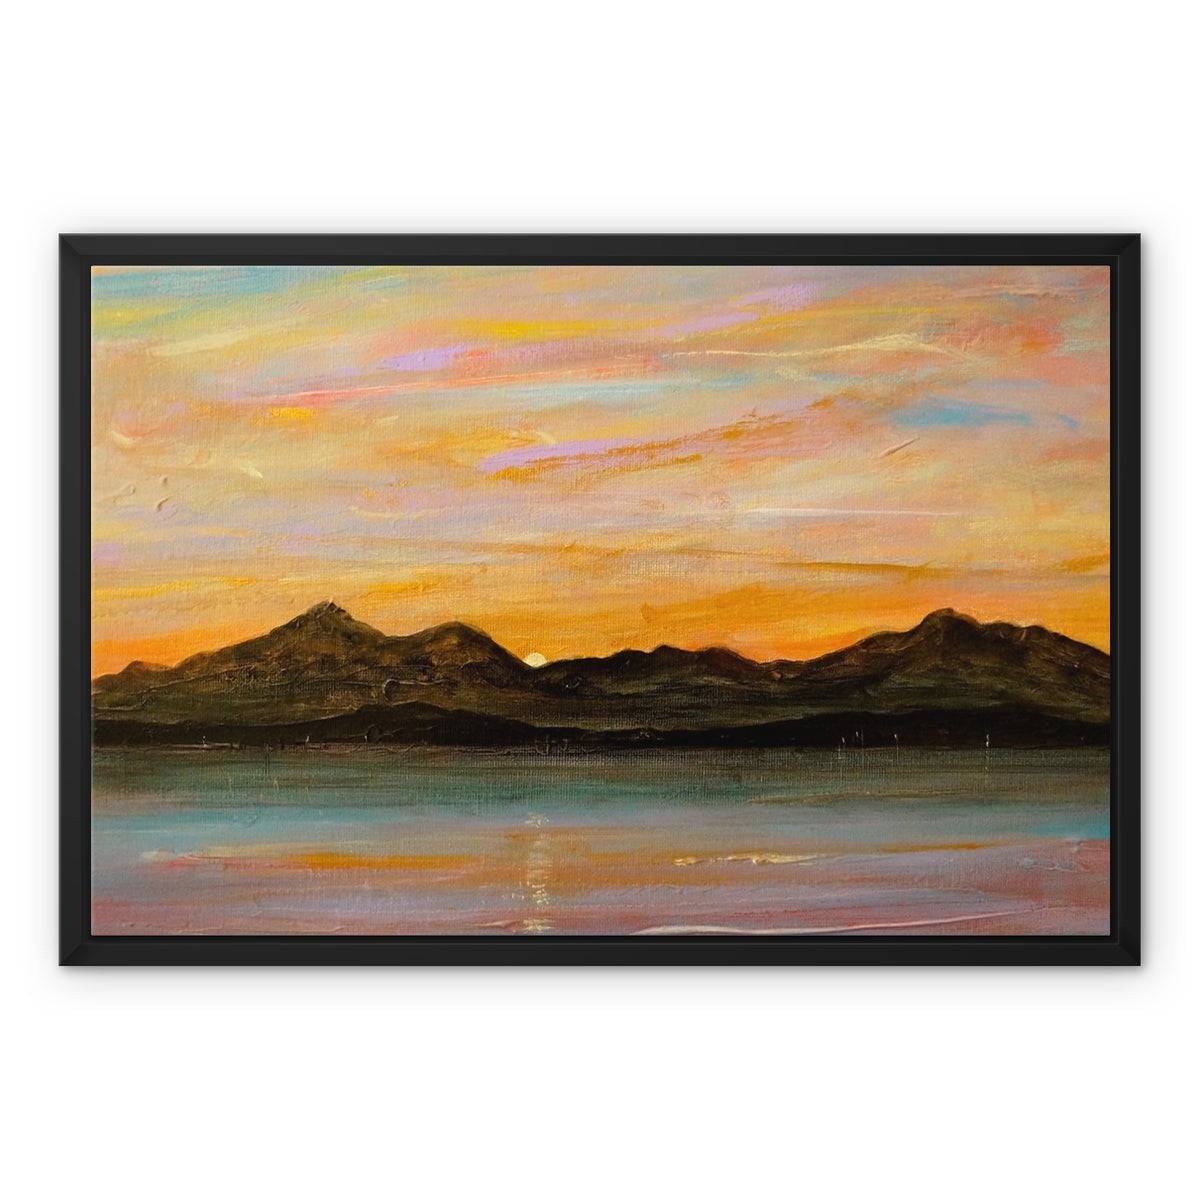 The Sleeping Warrior Arran Painting | Framed Canvas From Scotland-Floating Framed Canvas Prints-Arran Art Gallery-24"x18"-Black Frame-Paintings, Prints, Homeware, Art Gifts From Scotland By Scottish Artist Kevin Hunter